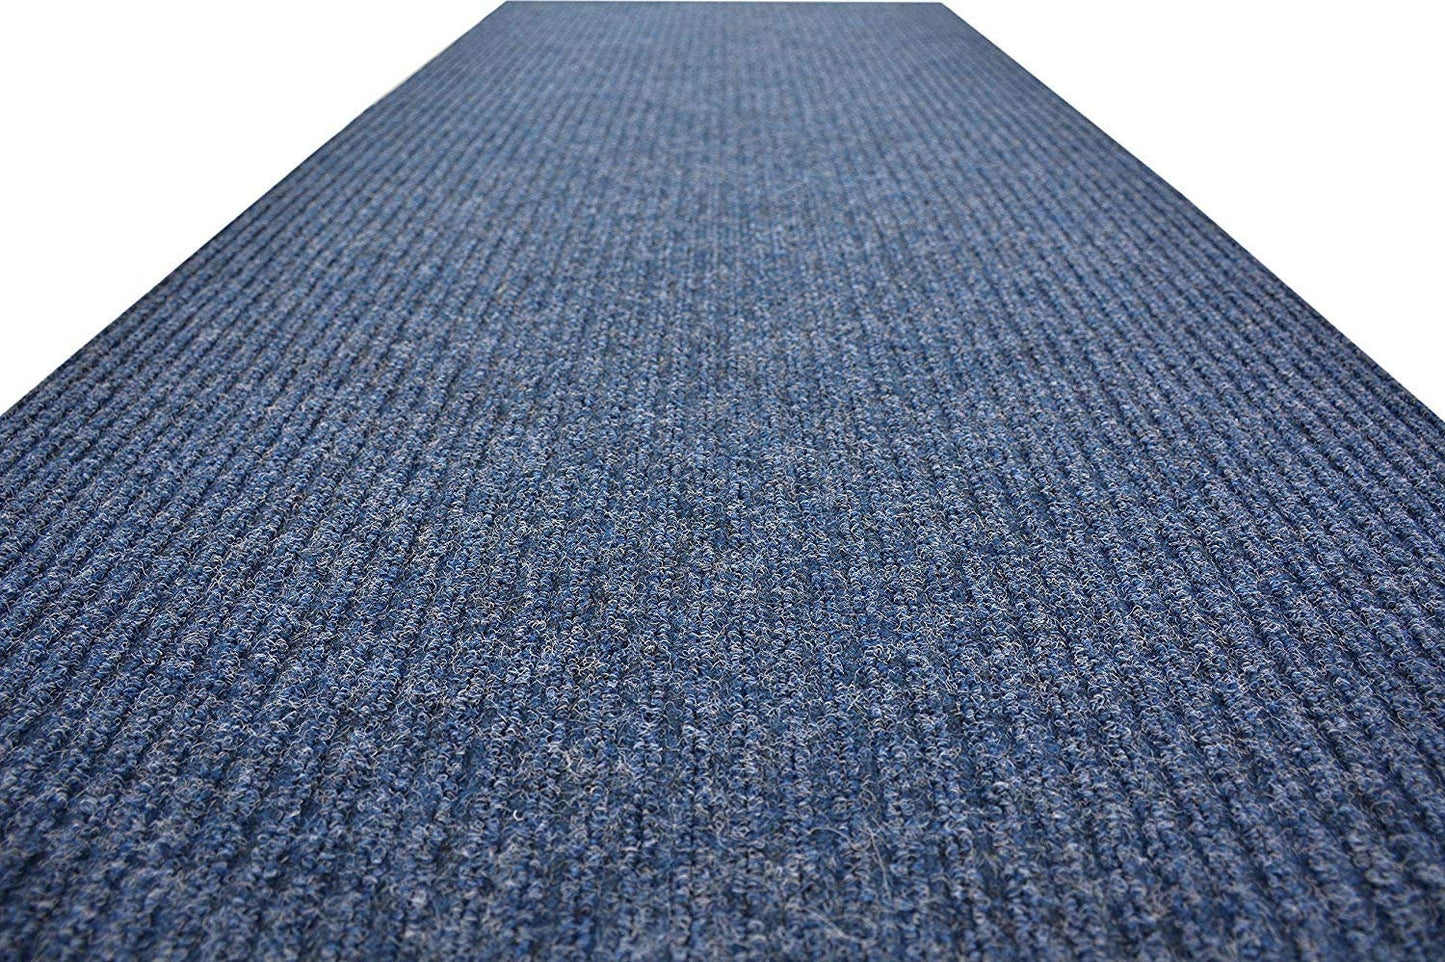 Custom Size Runner Rug Tough Collection Blue Skid Resistant indoor / outdoor Runner Rug Cut To Size Non Slip Runner Rug Customize By Feet